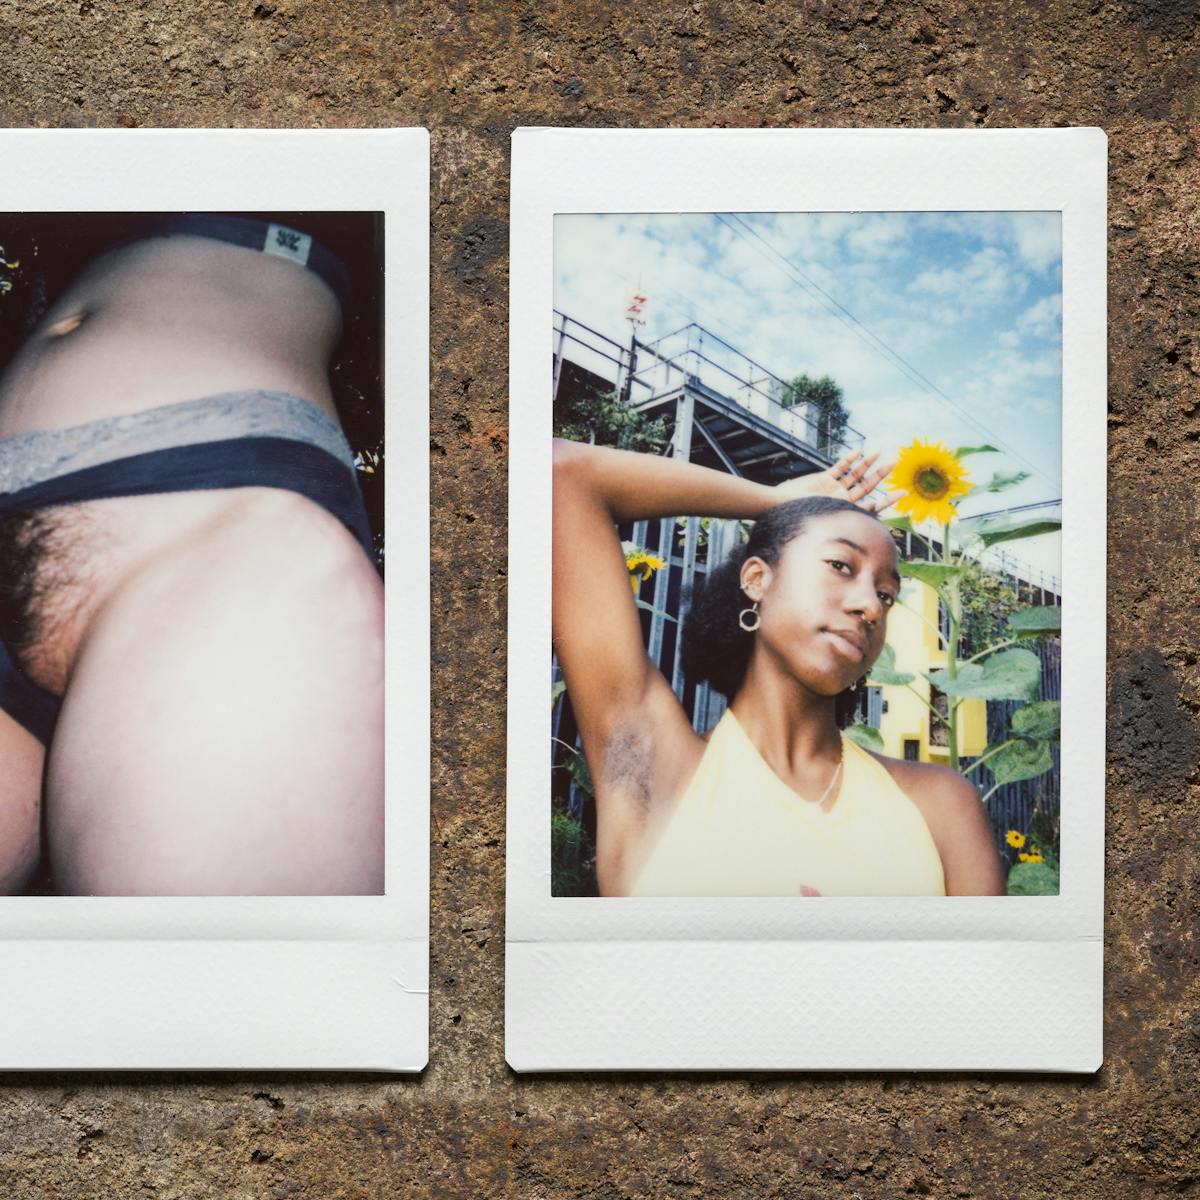 Photograph of three Instax Mini instant film prints in a line, resting on a textured brick surface. The print on the left shows a man wearing a black cropped vest standing against a graffitied wall with his right arm raised up behind his head to show his armpit hair. The print in the centre shows a closeup, flash lit image of a woman's groin and midriff. She is pulling aside her knickers to show her pubic hair. The print on the right shows a woman standing outside in front of a metal staircase. Behind her is also a tall sunflower. Her right arm is raised up behind her head to show her armpit hair.